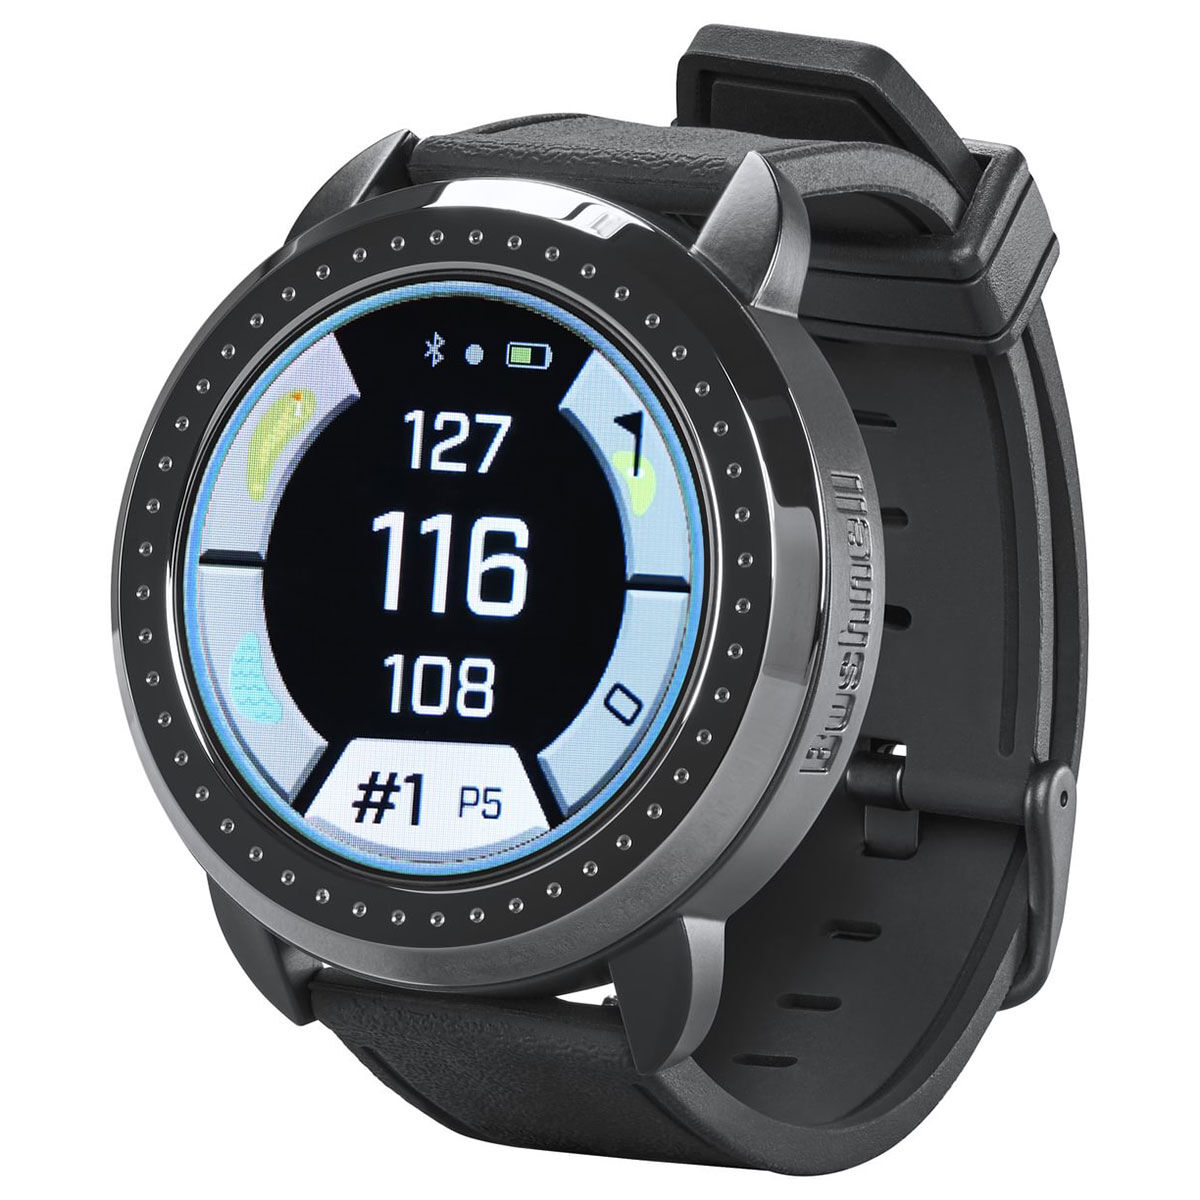 Bushnell Black Comfortable ION Elite Golf GPS Watch | American Golf, one size